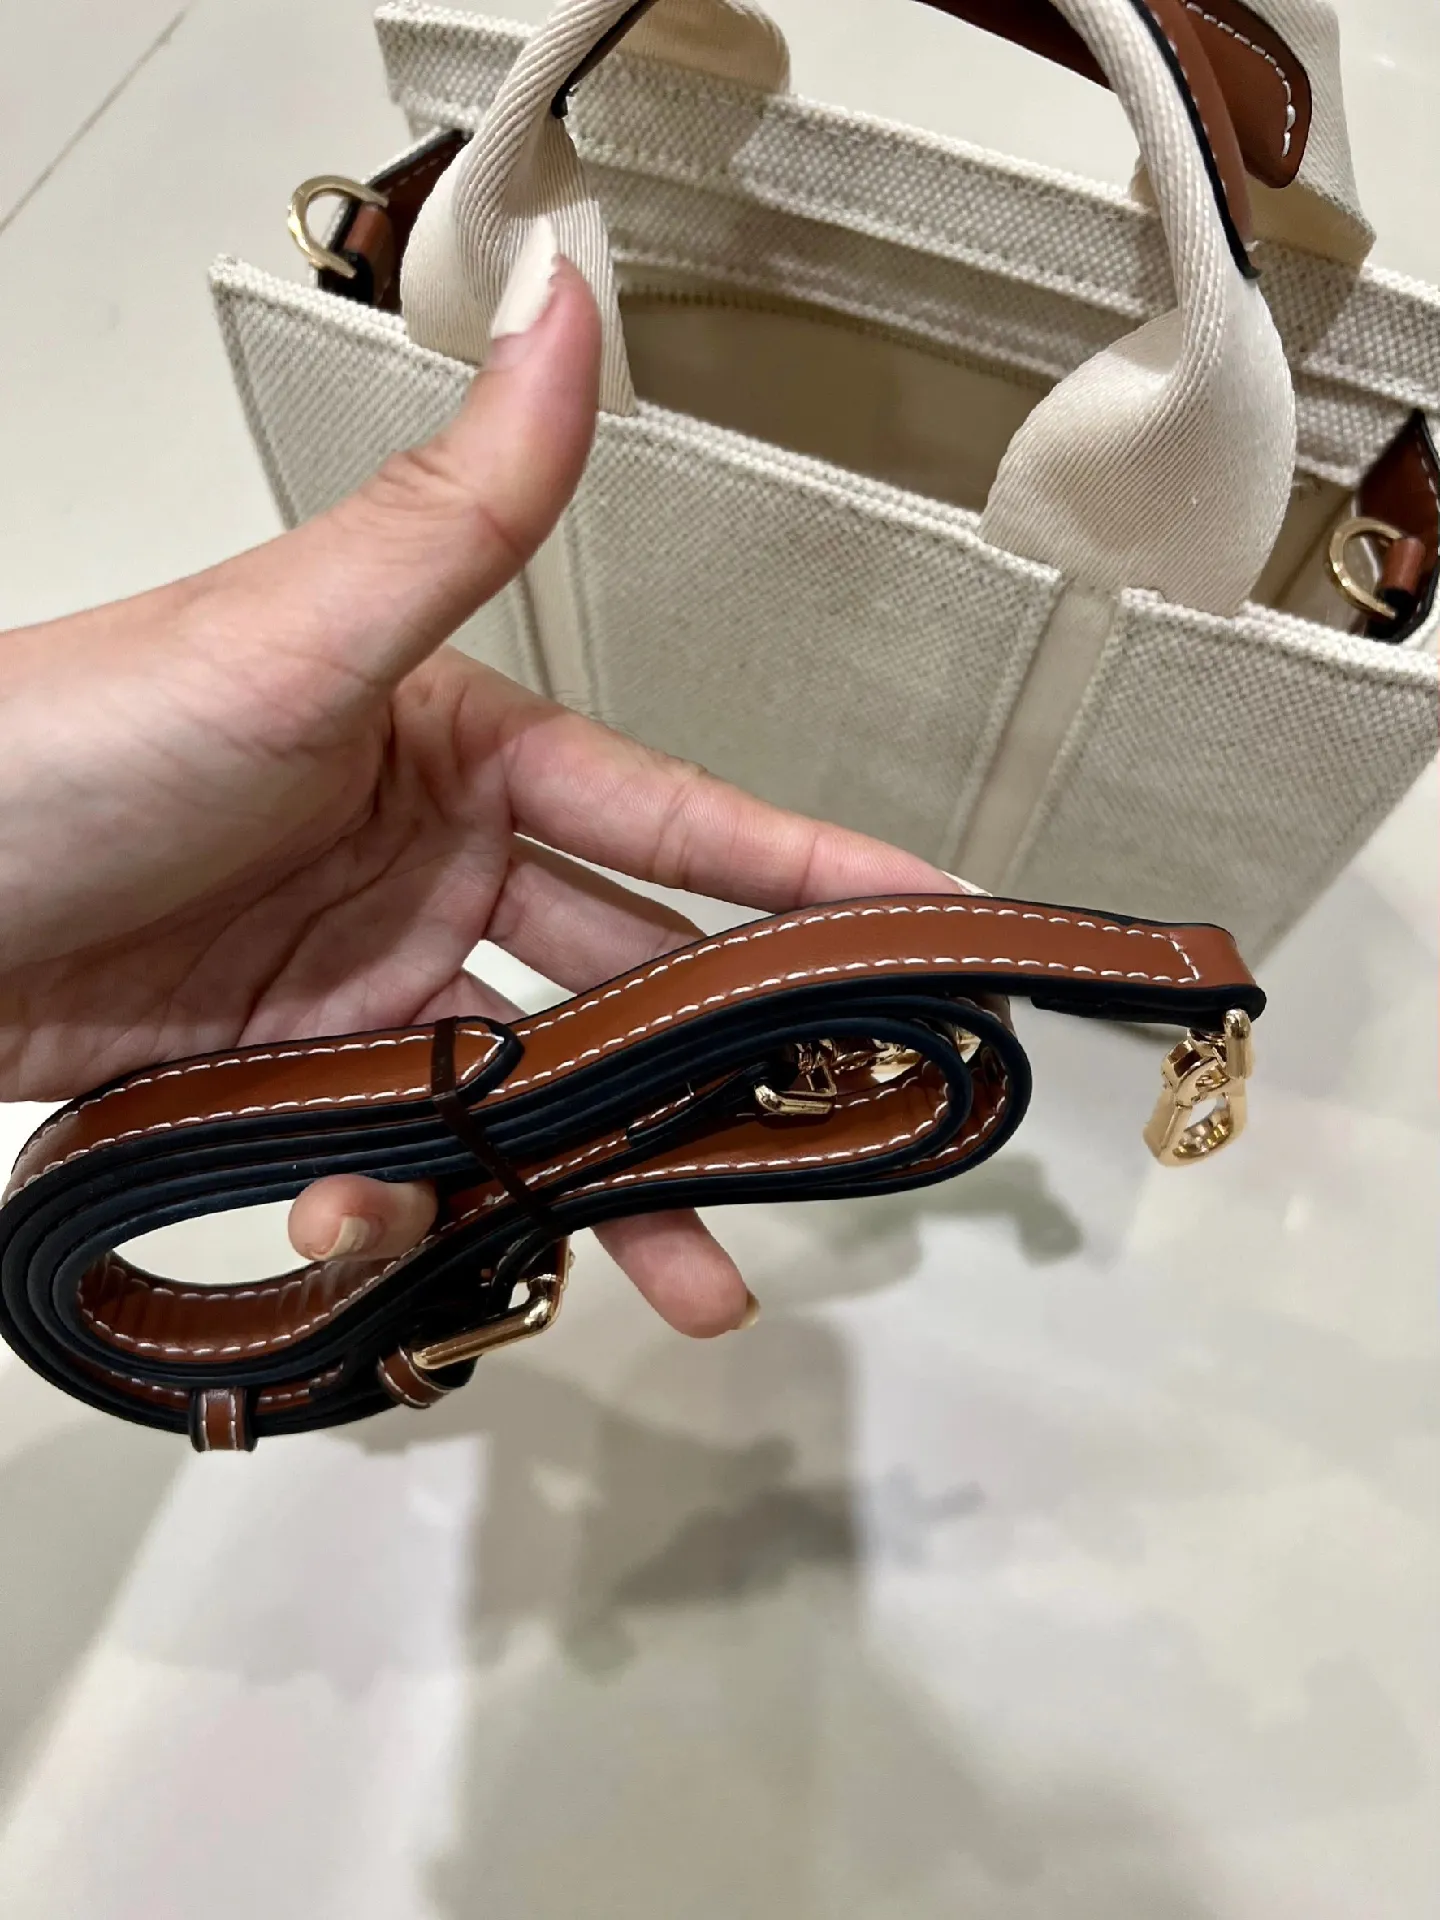 Coach Review! Troupe Tote 16 Micro Bag